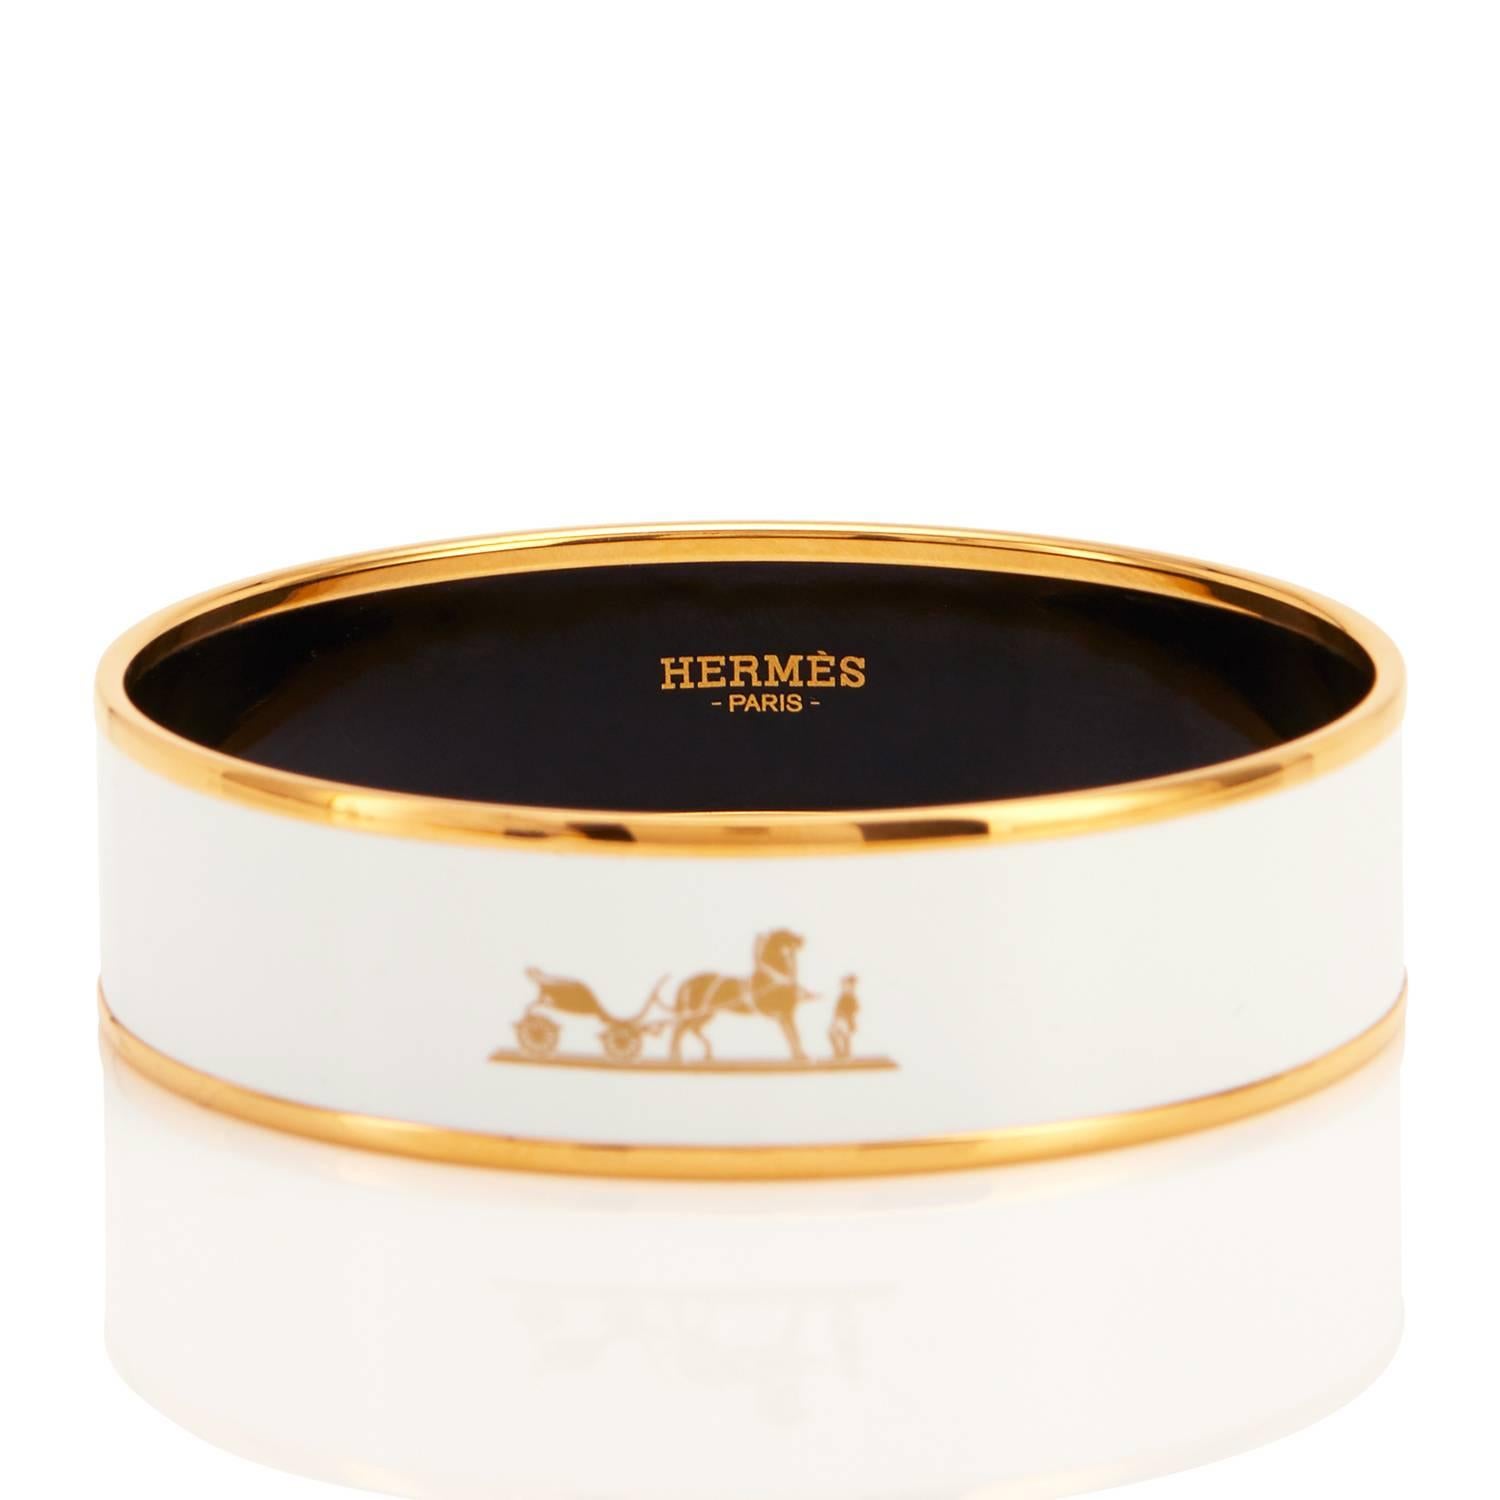 Hermes White Kelly Caleche Gold Enamel Bangle Bracelet 70
The iconic Kelly Caleche design is being discontinued. 
And this is the SOLD OUT, most wanted white colorway!
Brand New in Box.  Store Fresh. Pristine Condition.
Perfect gift! Comes with